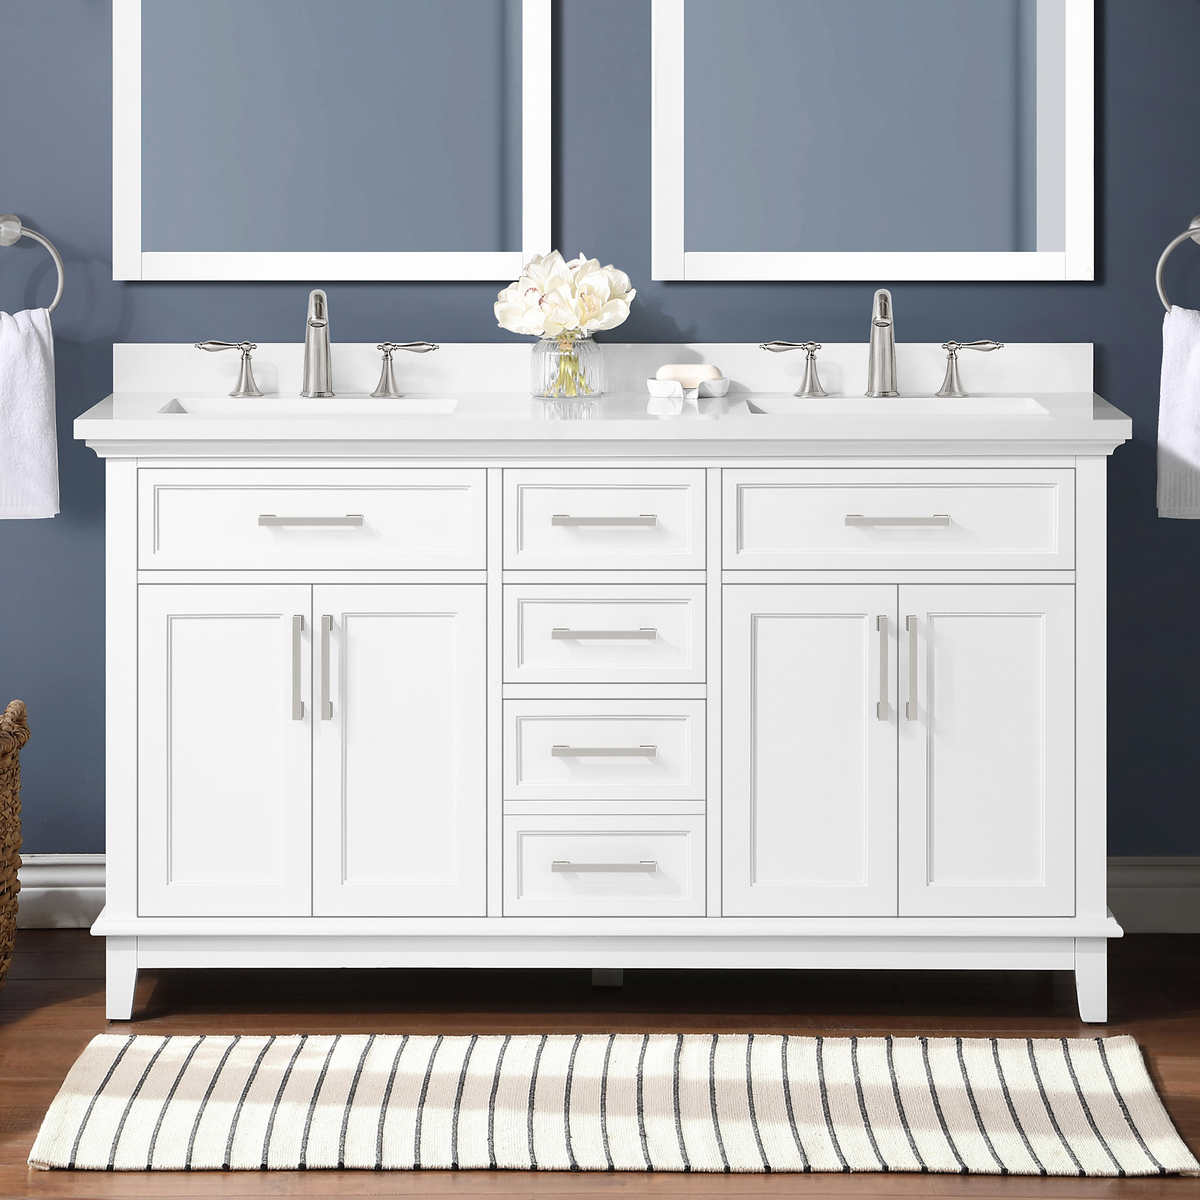 Featured image of post Bathroom Vanity Tray Australia Australia wide on all mixers tapware accessories only